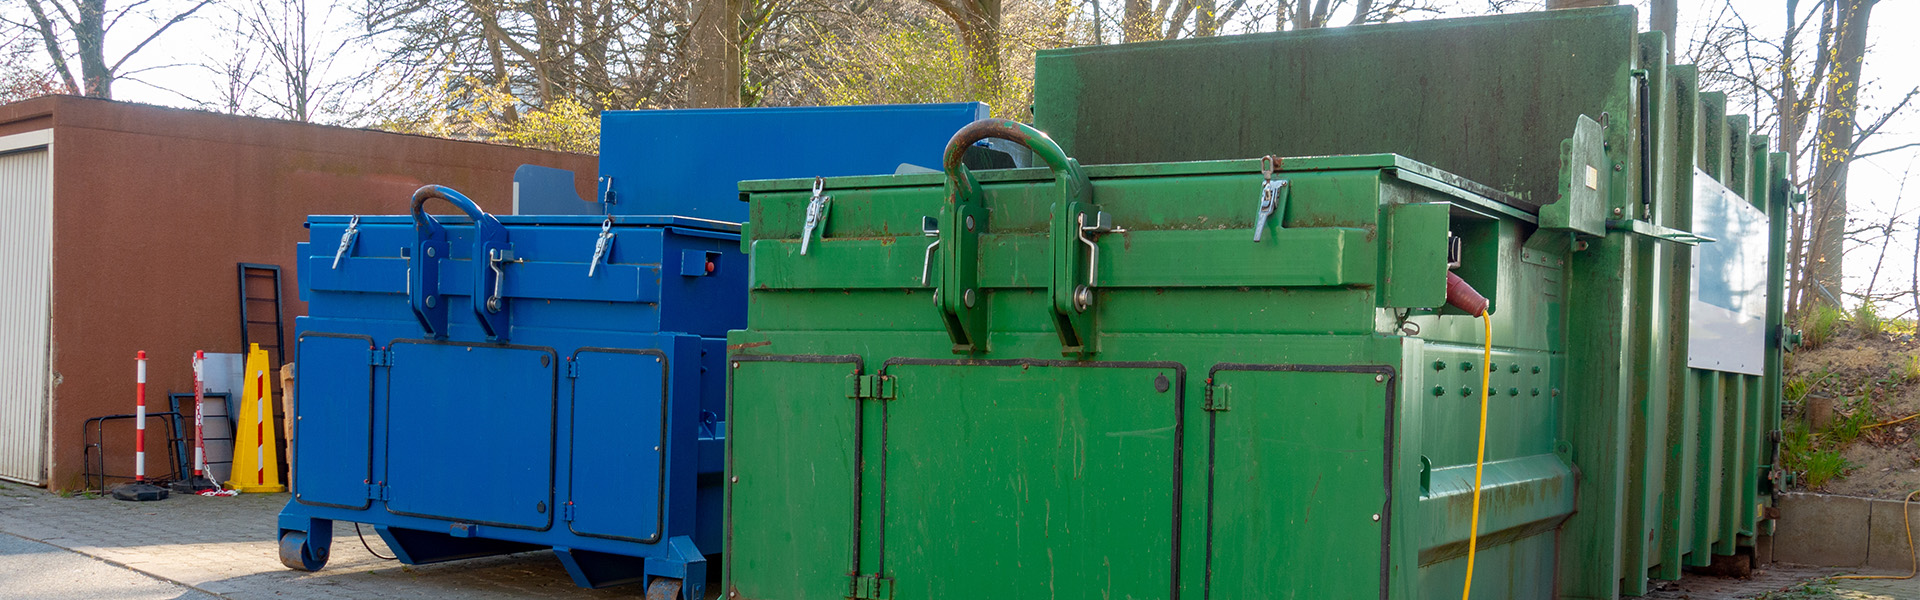 Two Trash Compactors For Wtg Waste Equipment Services